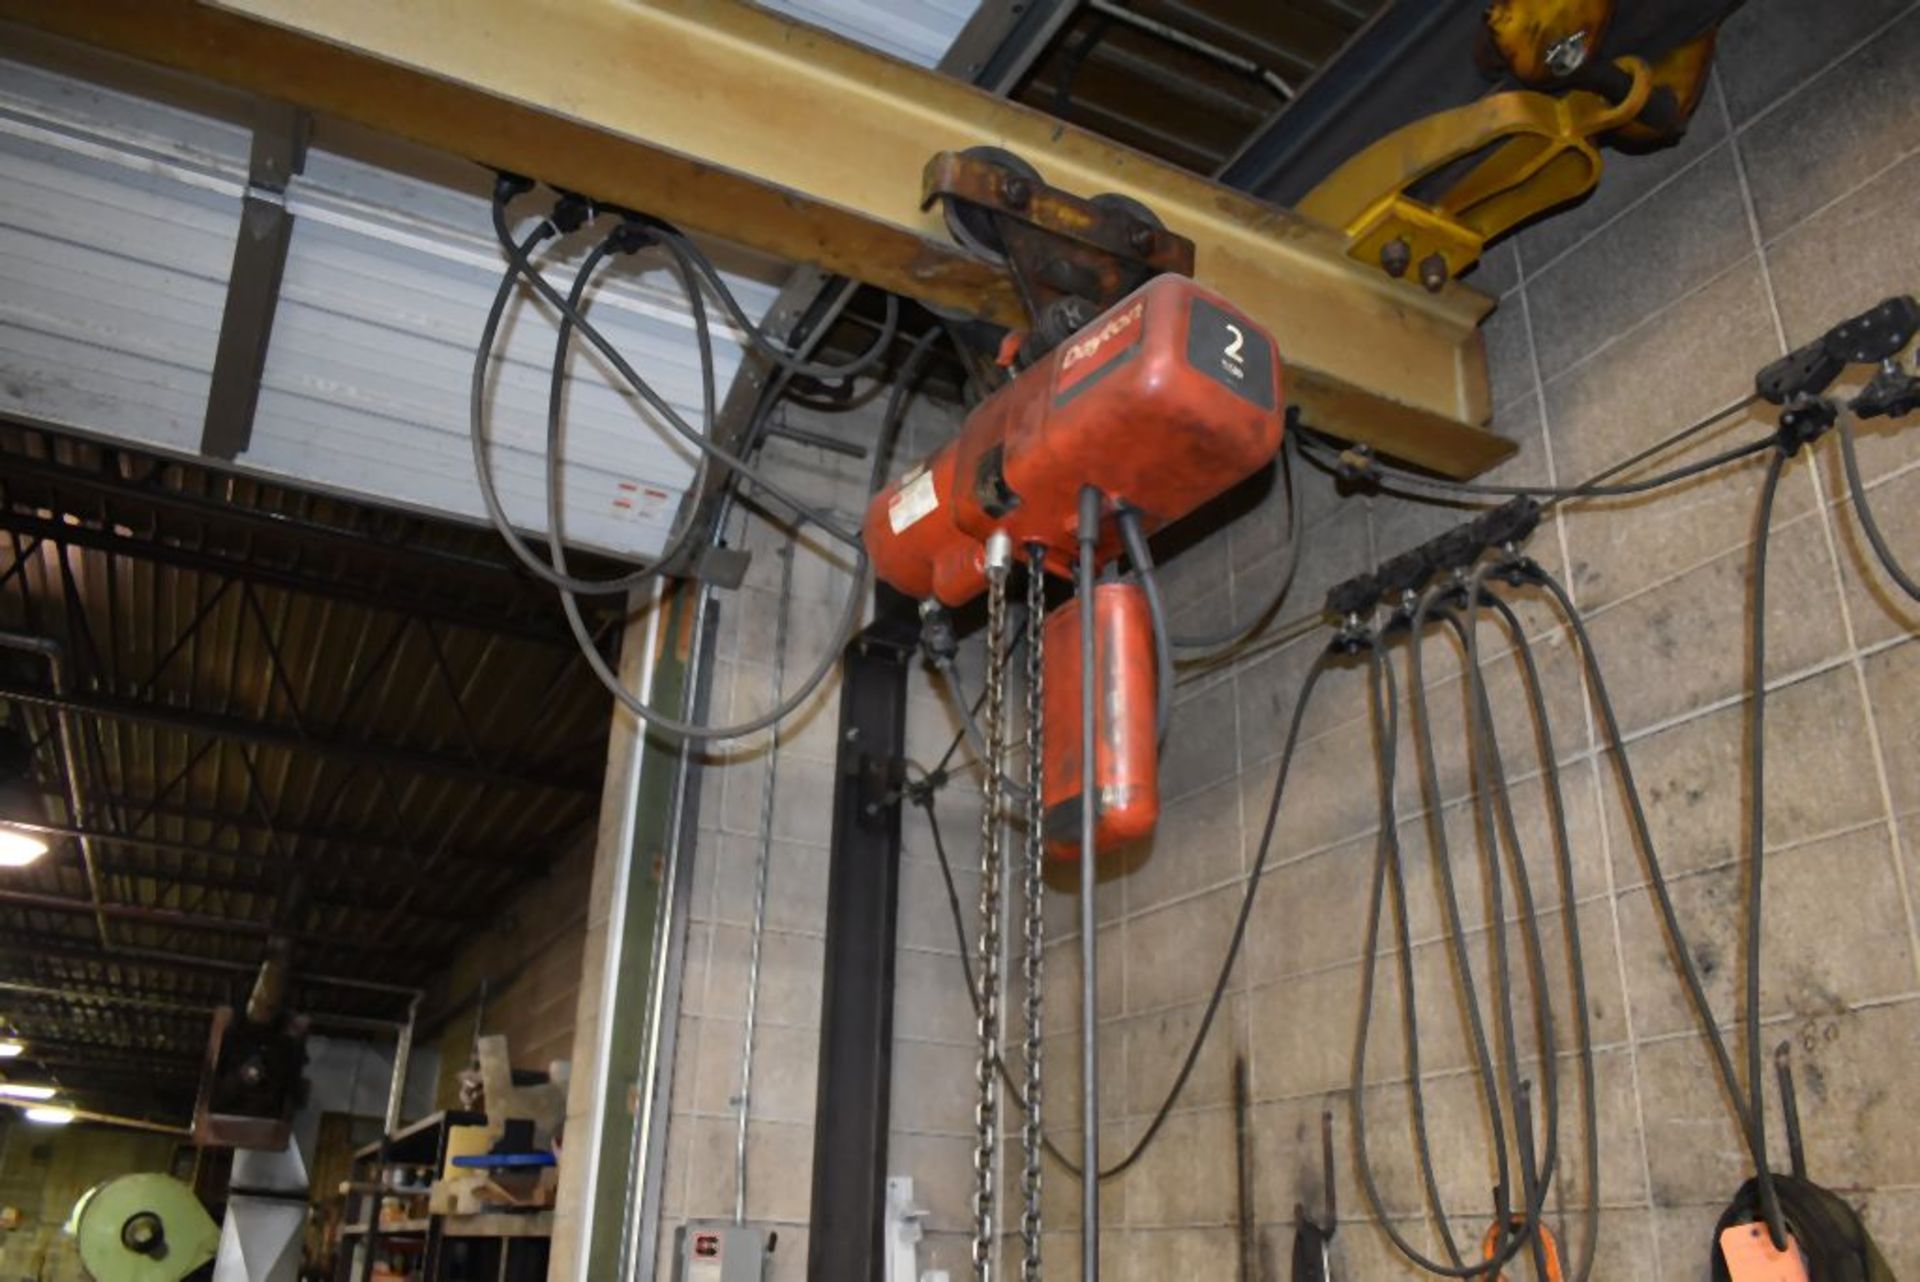 DAYTON 2 TON CHAIN HOIST, PENDANT CONTROL, HARDWIRED, WIRES MUST BE CAPPED - Image 2 of 2